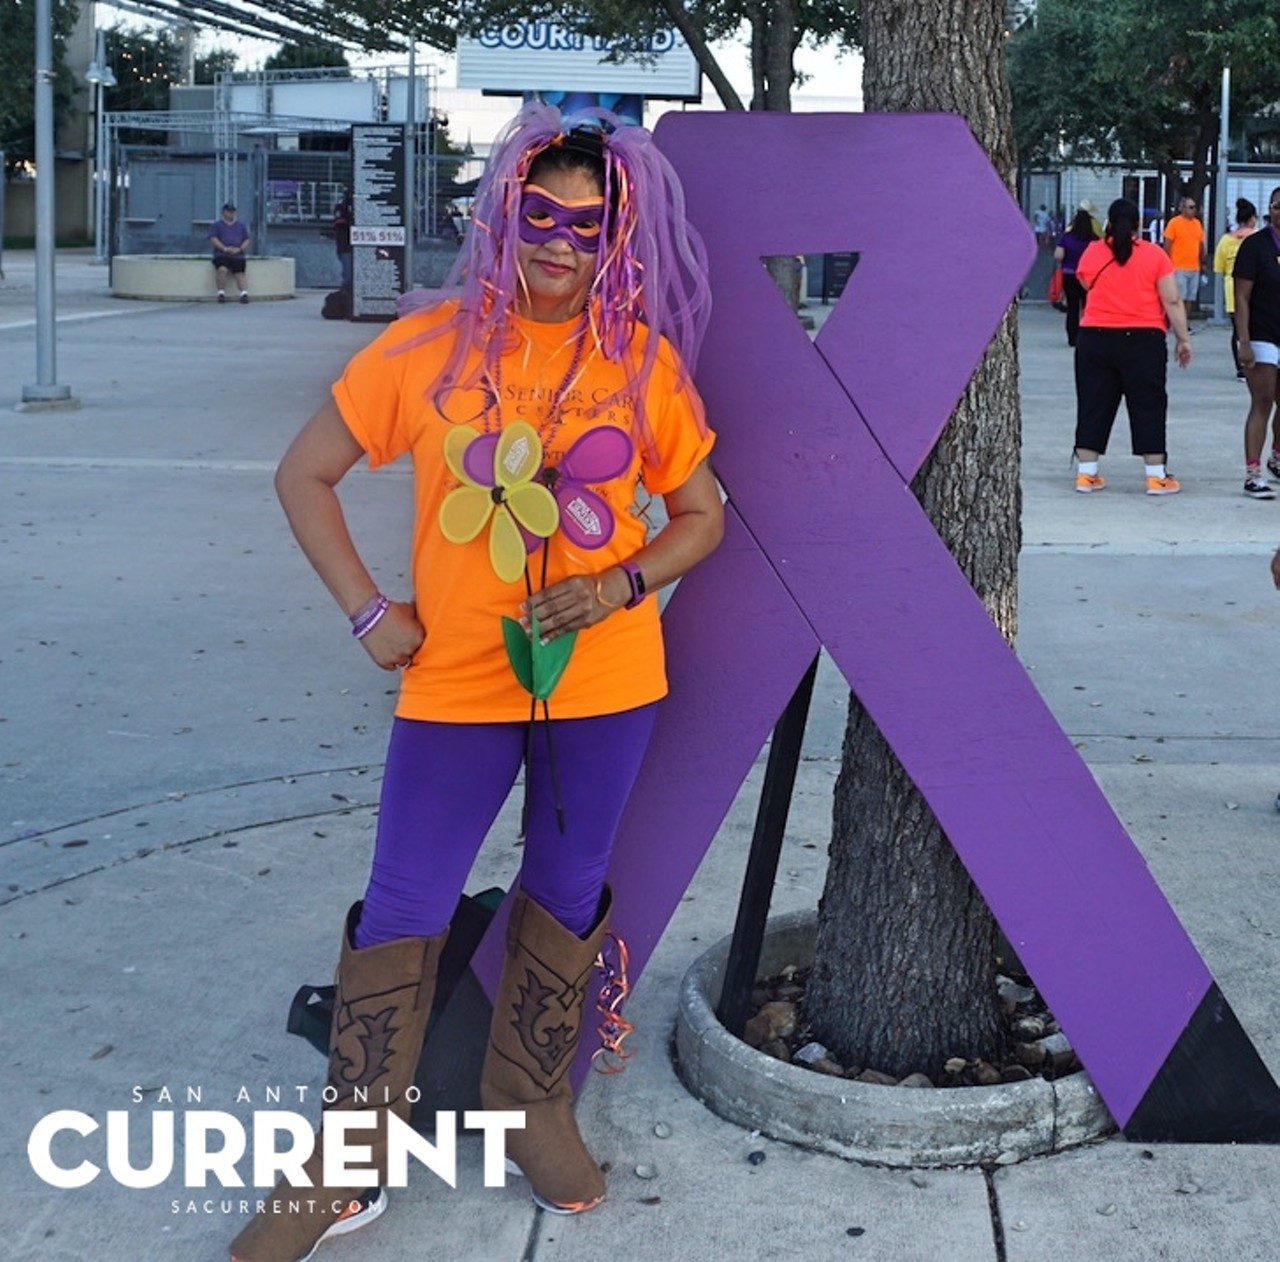 Photos from the Walk to End Alzheimers at the AT&T Center